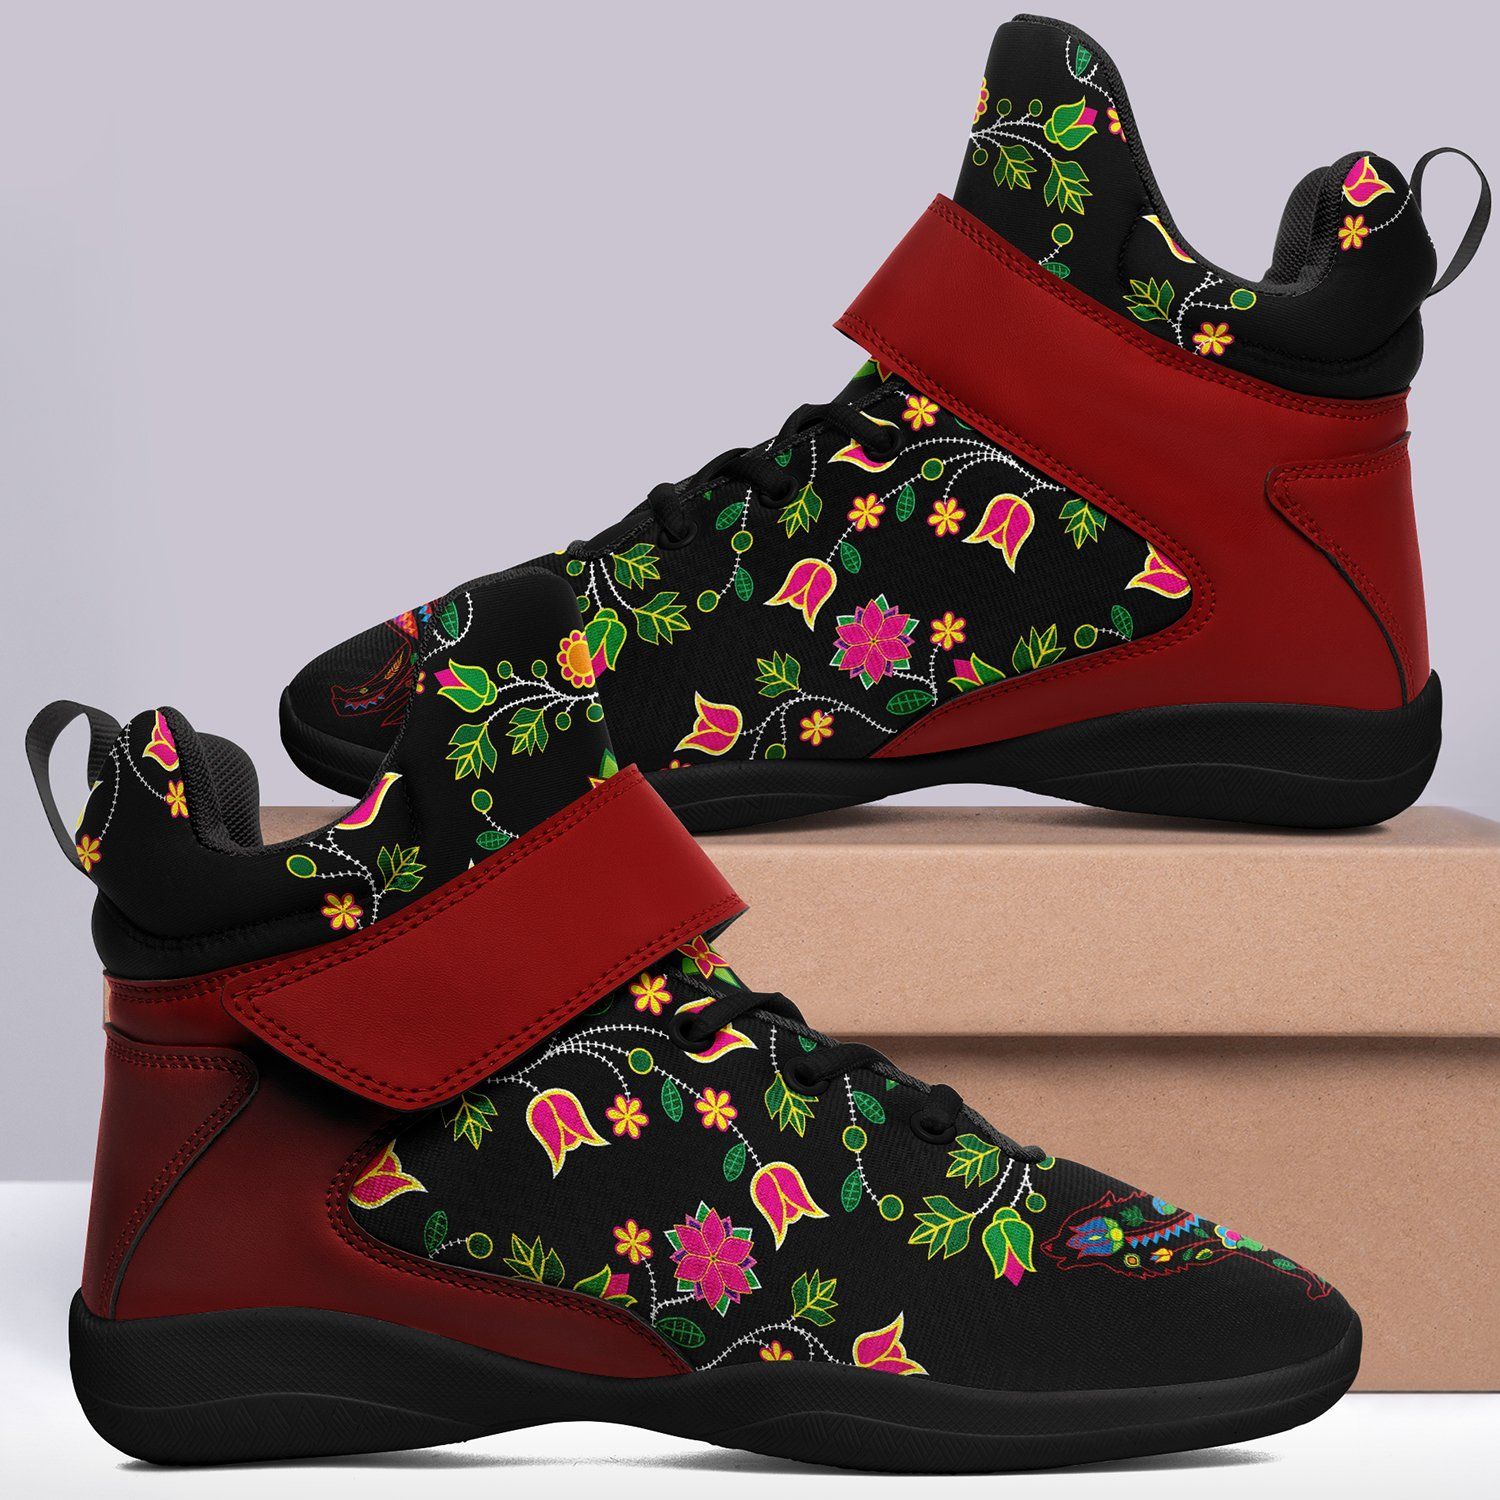 Floral Wolf Ipottaa Basketball / Sport High Top Shoes - Black Sole 49 Dzine 